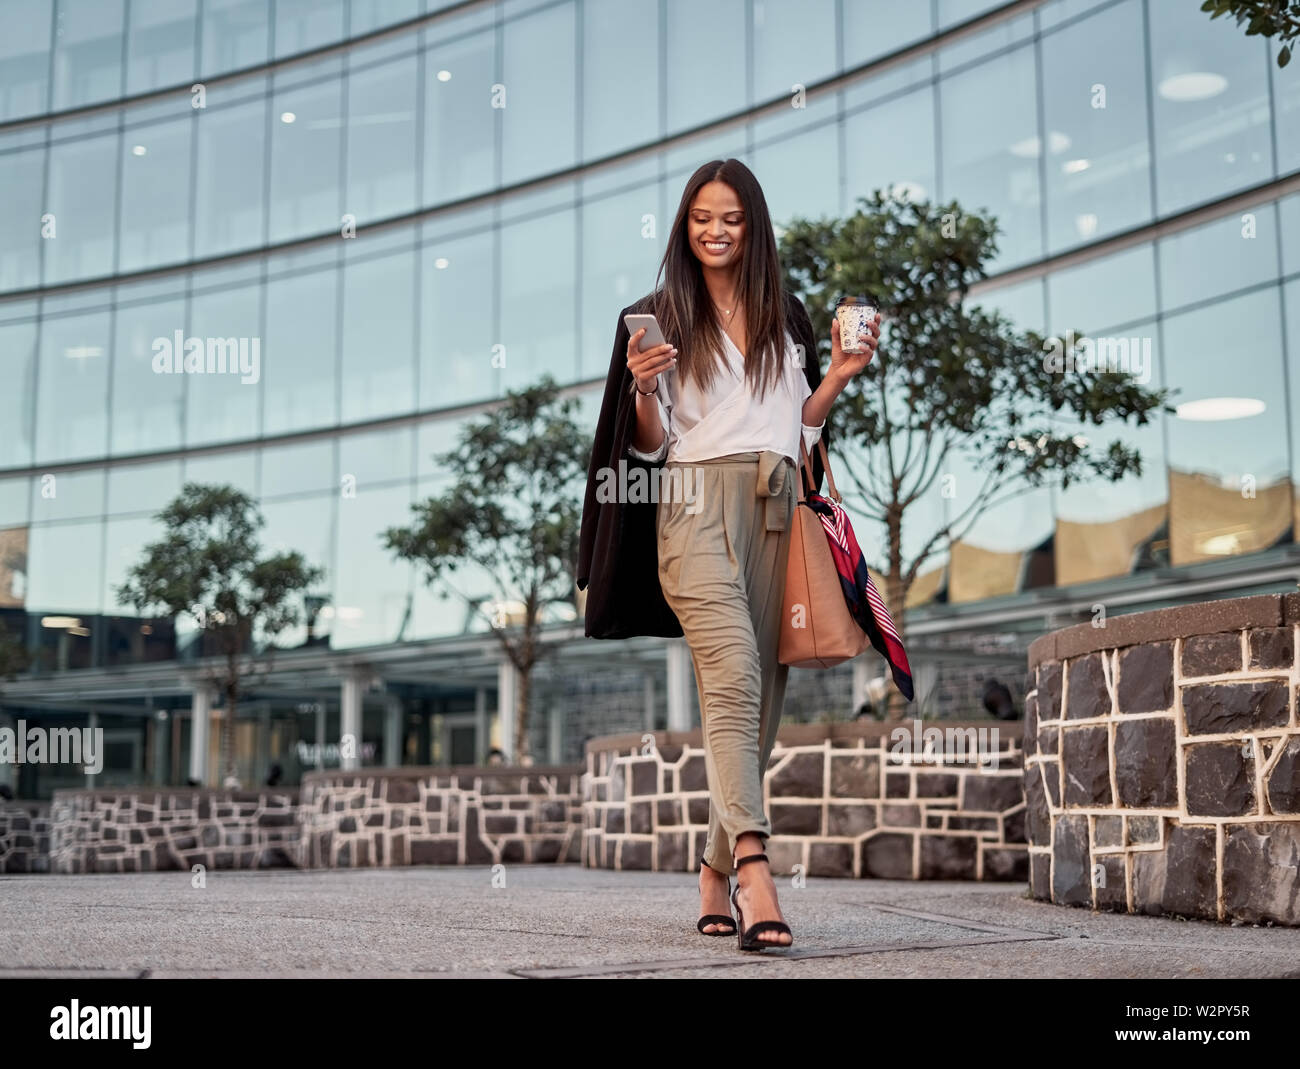 Smiling young woman using cellphone outdoors in the city Stock Photo